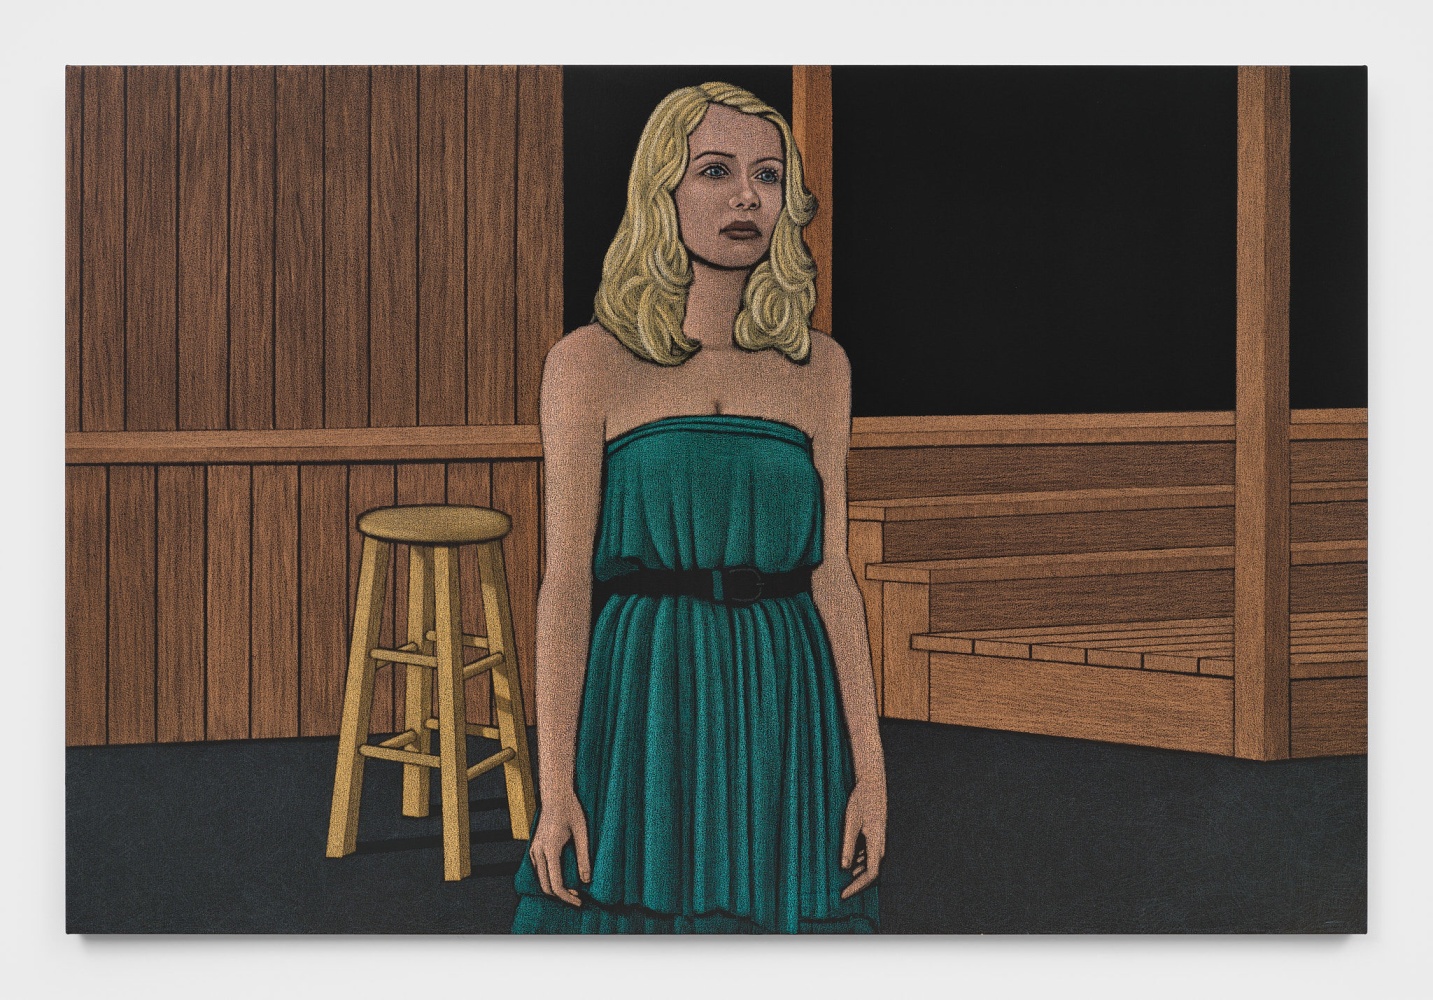 An oil pastel painting of a blonde woman in a teal dress in the foreground looking off into the distance past the viewer in a wooden room with a wooden stool behind her.